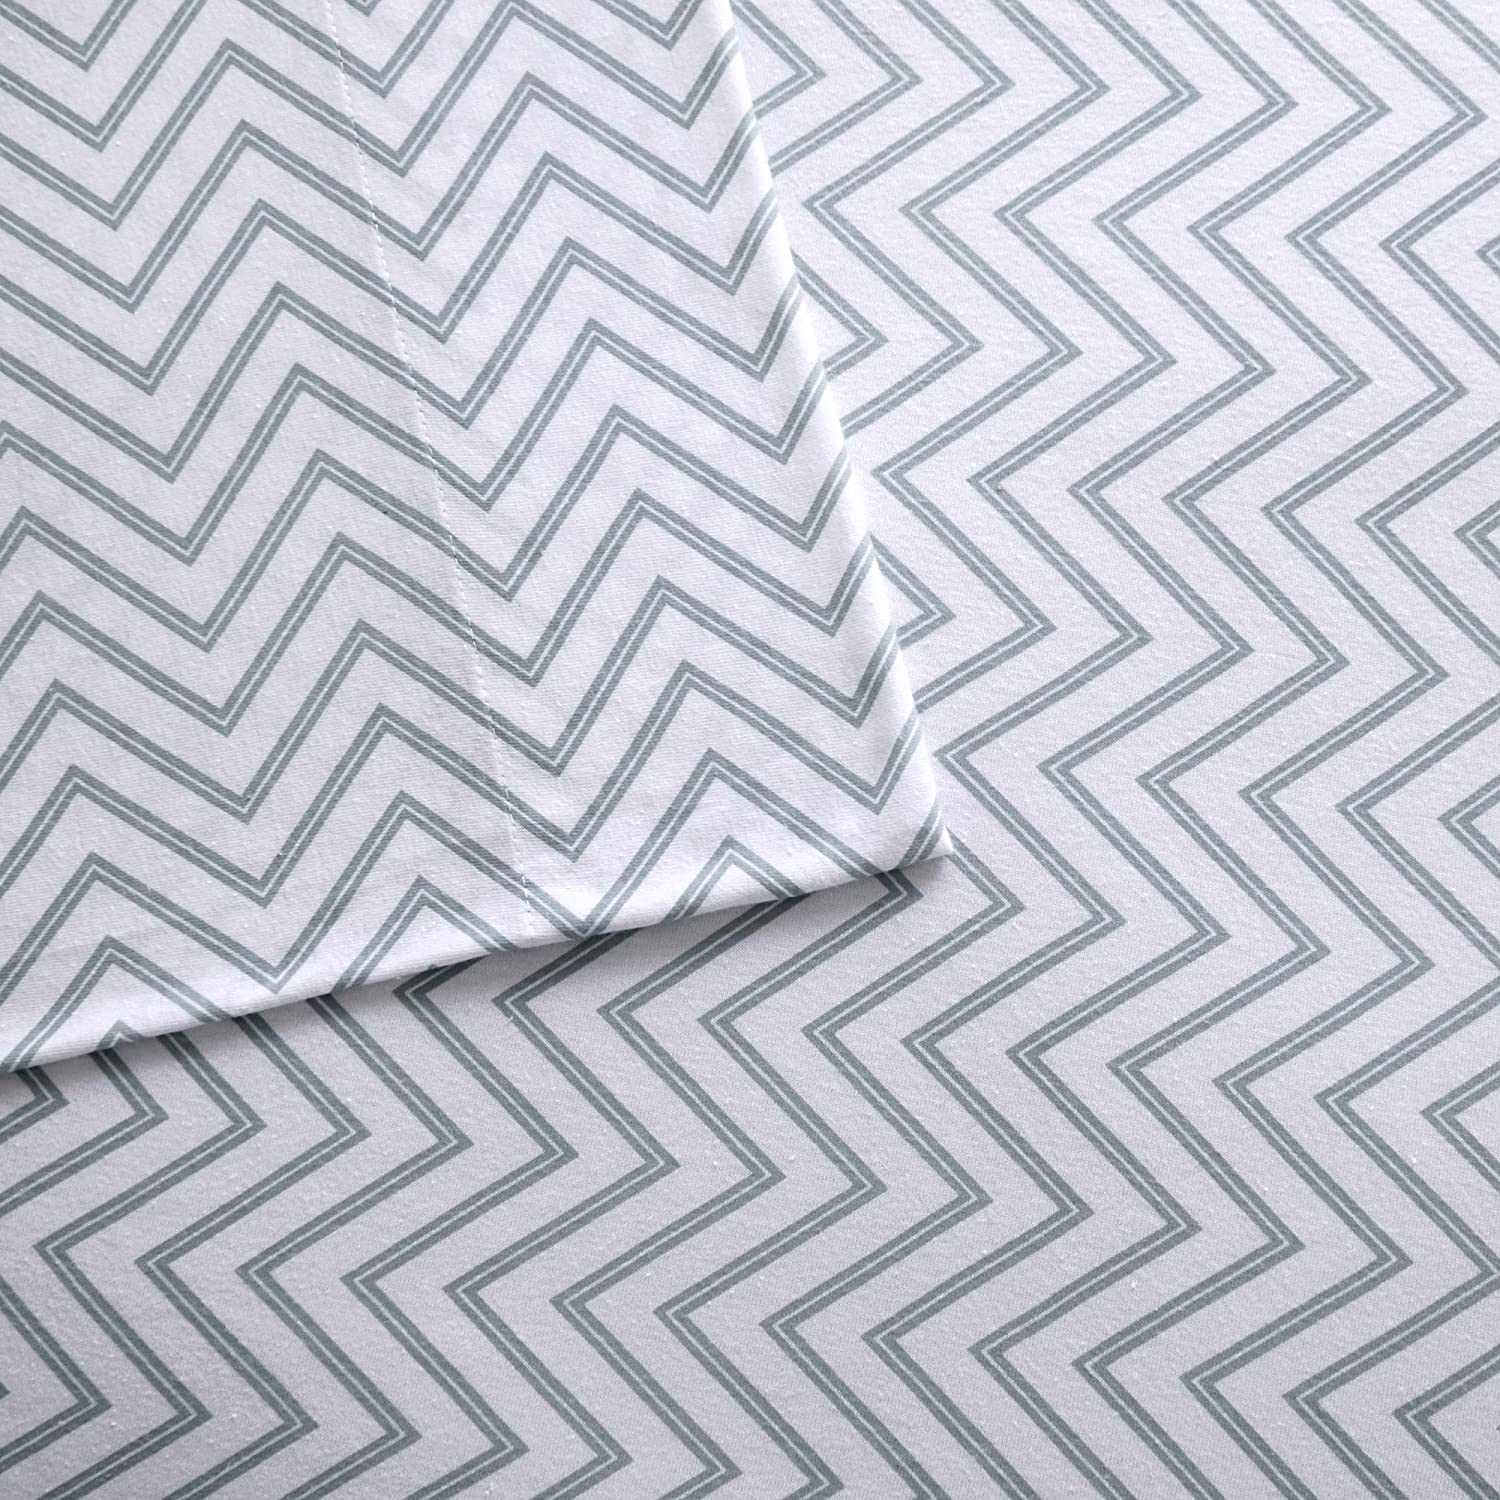 Intelligent Design Blend Jersey Knit Full, Coastal Cotton, Grey Chevron Bed Set 4-Piece Include Flat, Fitted Sheet &amp; 2 Pillowcases